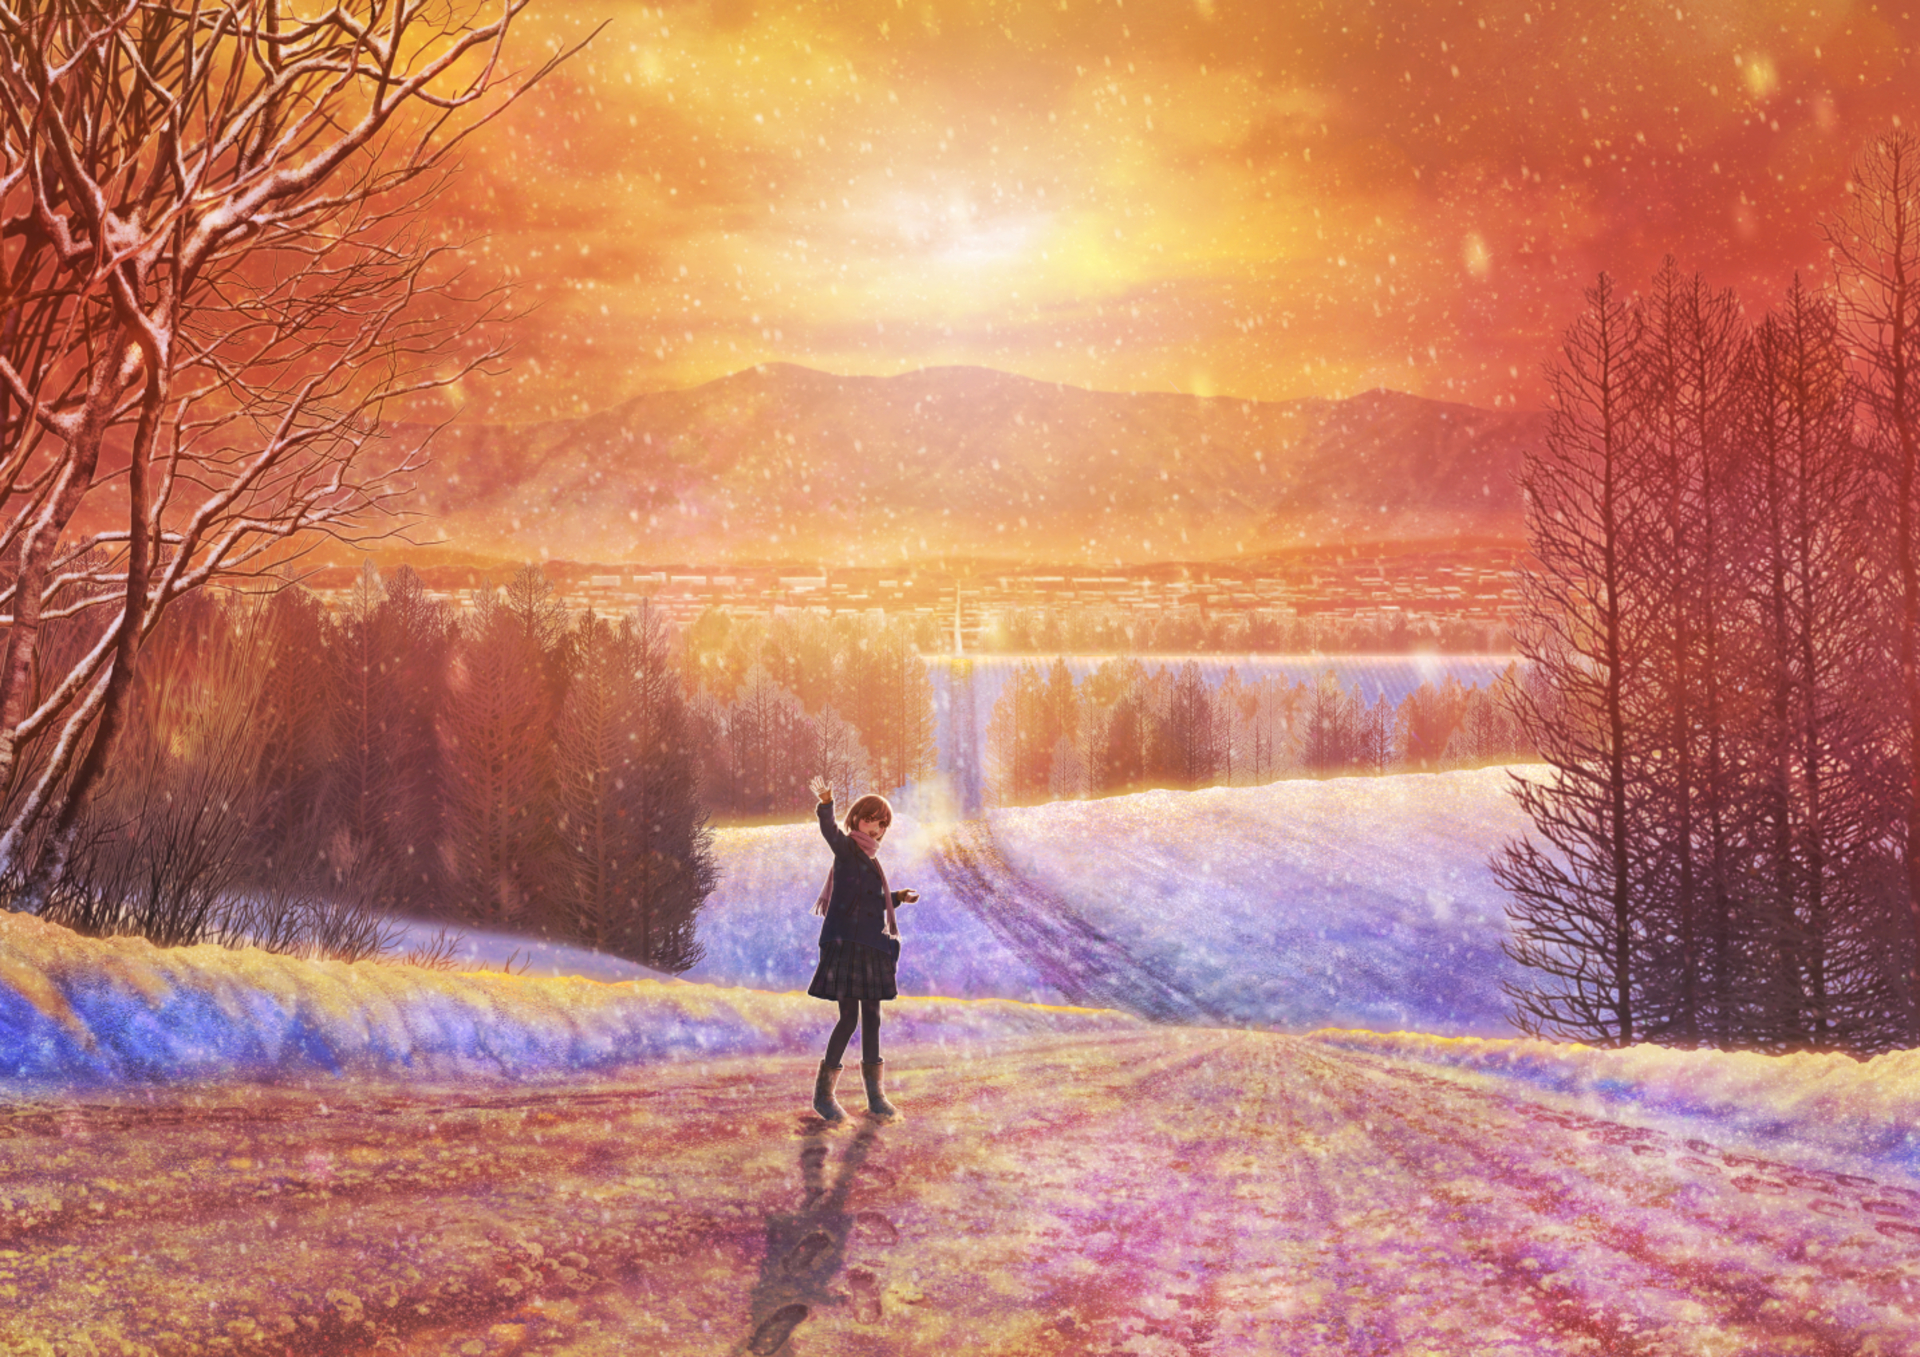 Anime girl waving goodbye as she leaves down a long, snowy road by Kupe